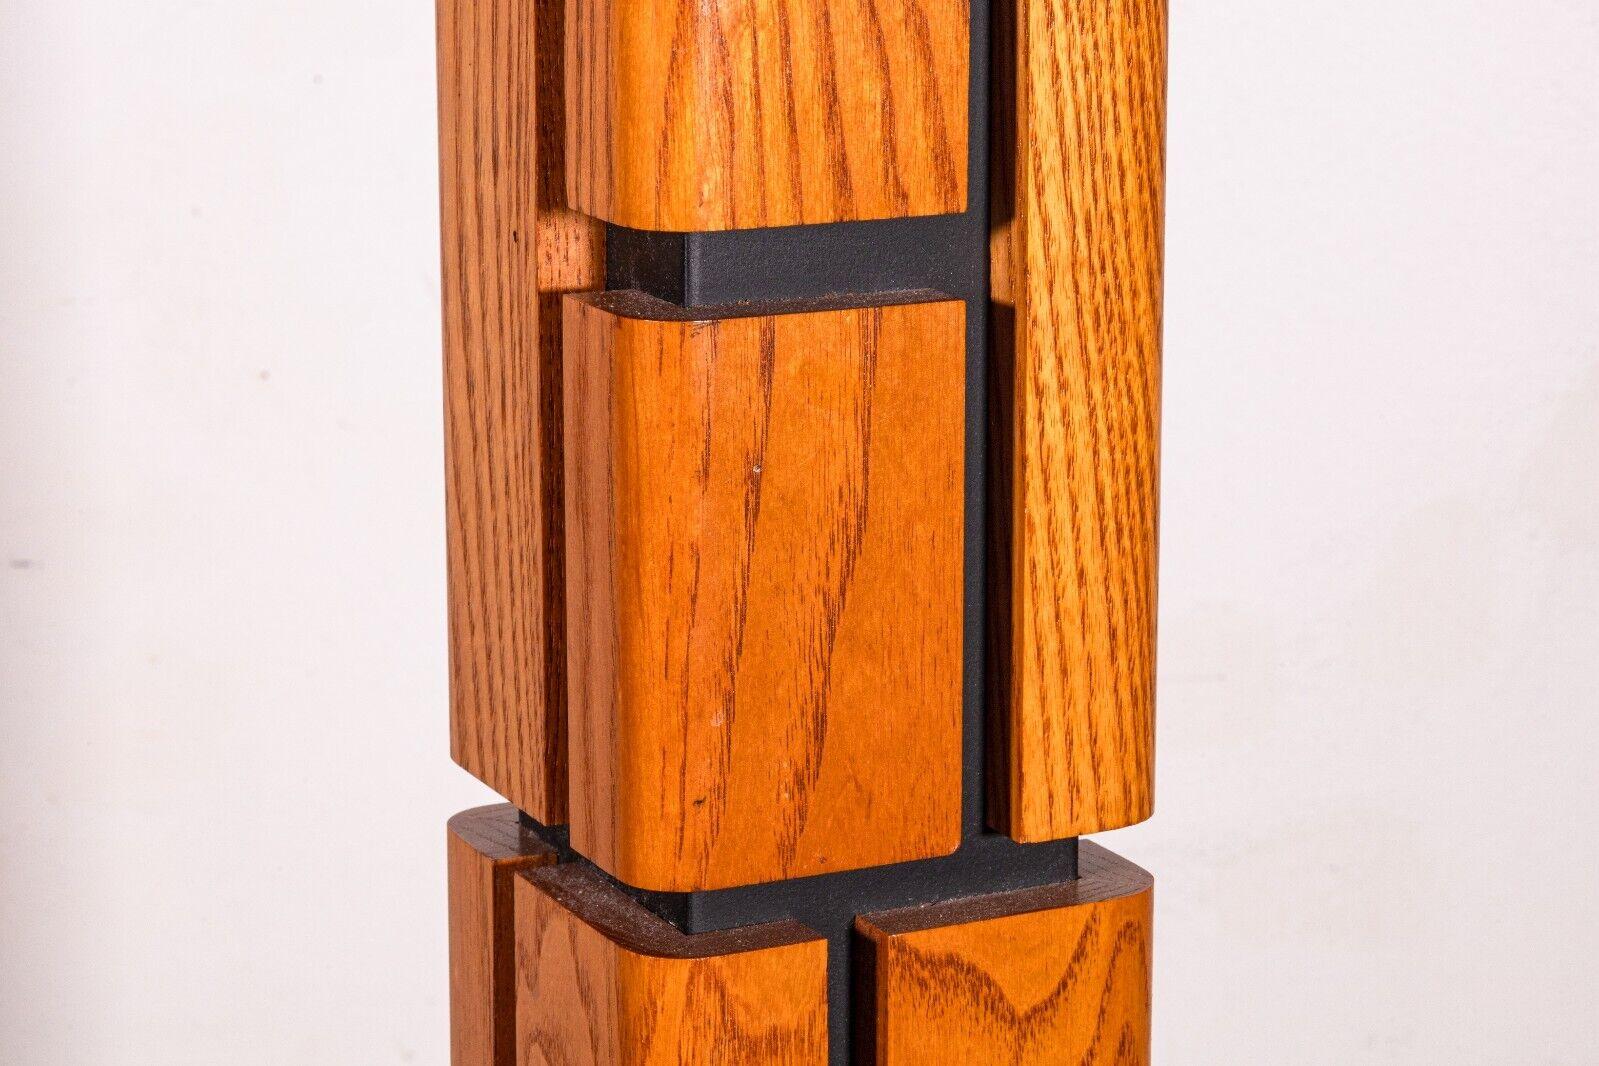 Pair of Geometric Post Modern Wood Puzzle Table Lamps 1970s For Sale 3